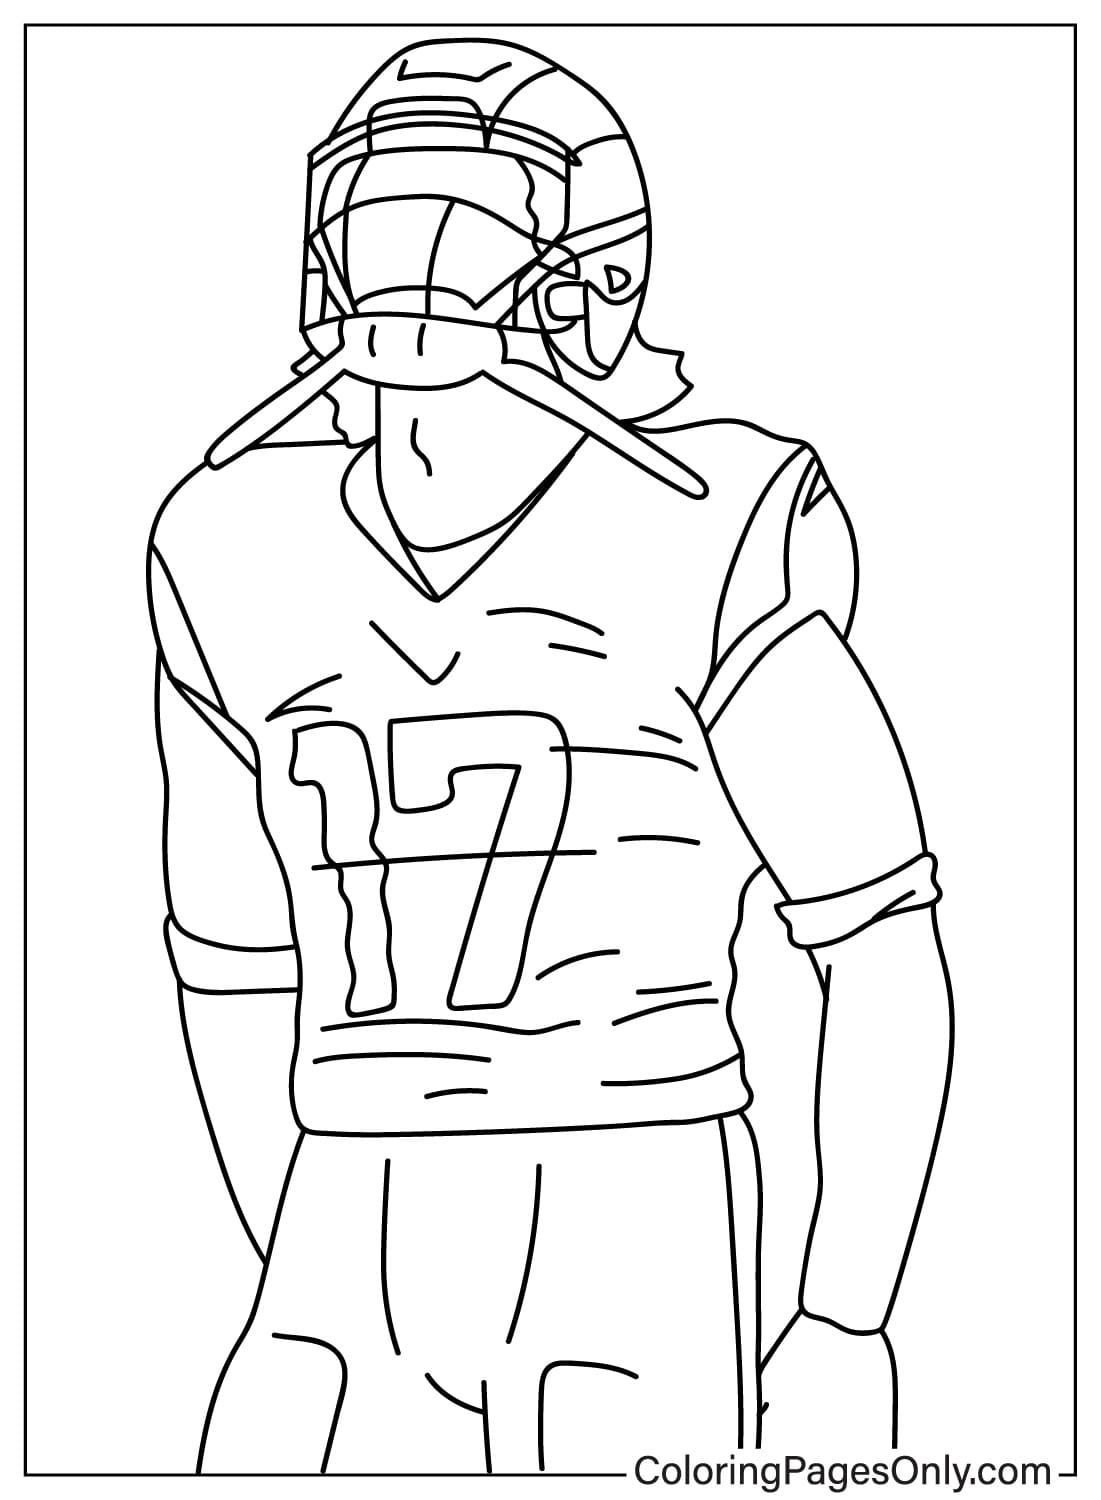 Puka Nacua Coloring Page Free from Los Angeles Rams